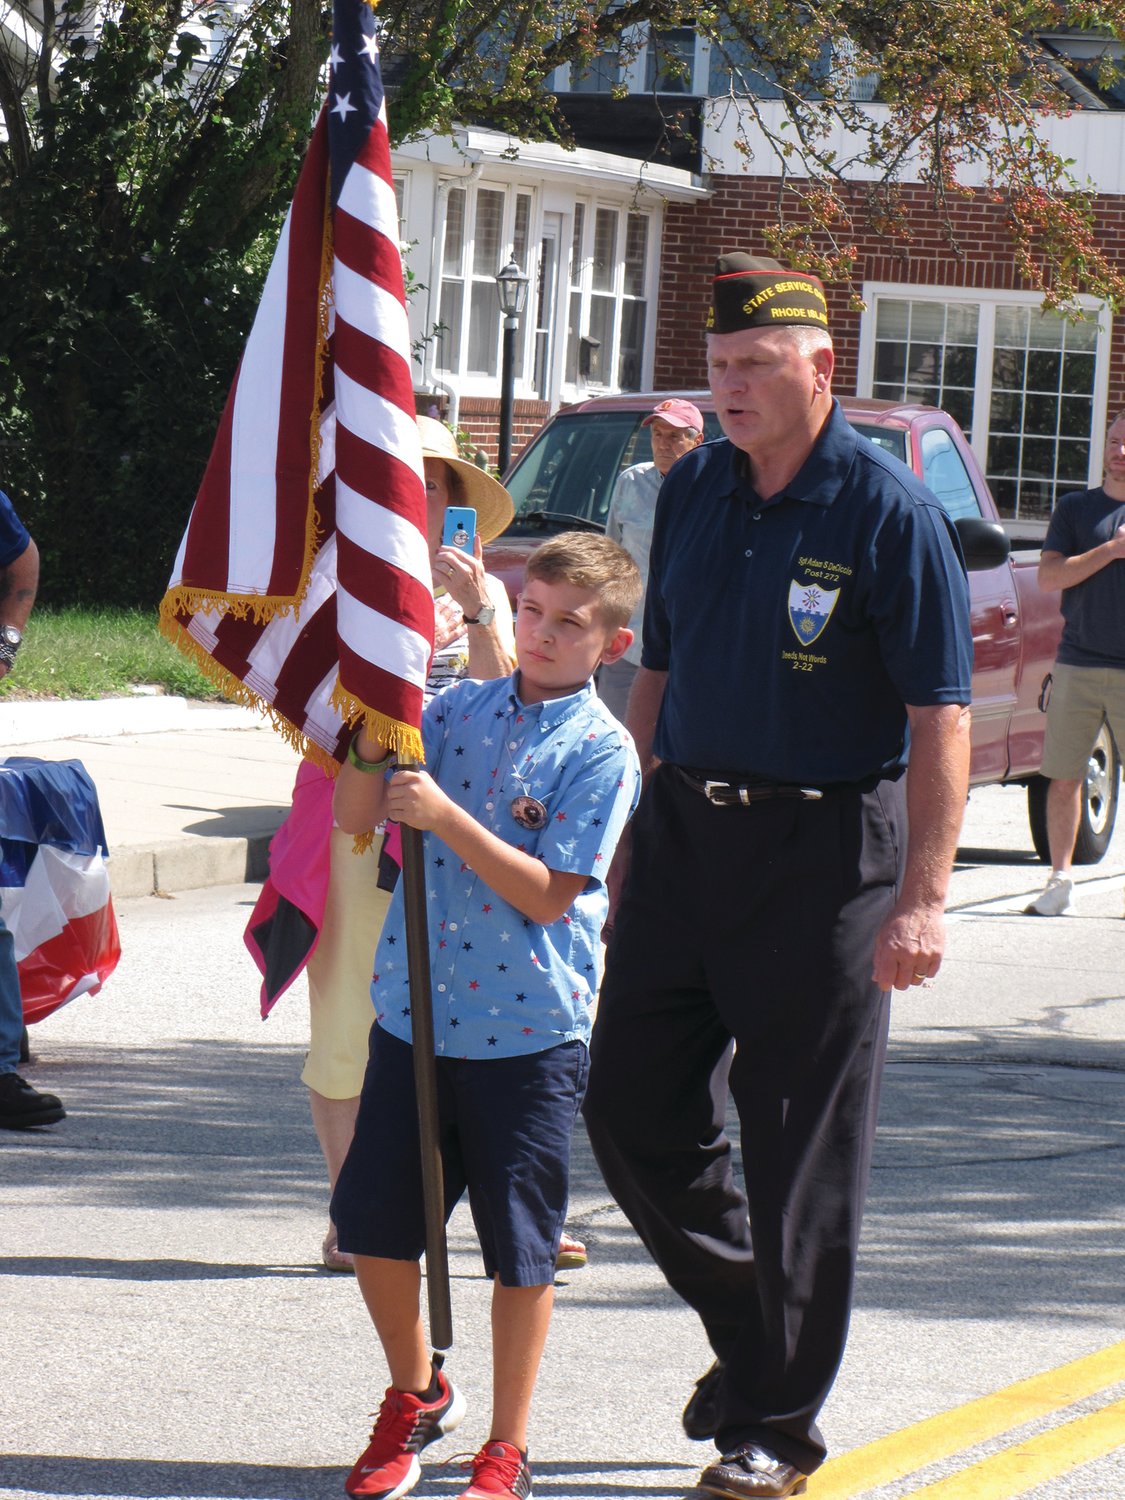 PRESENTING THE COLORS: Gunner DeCiccio, accompanied by Raymond Denisewich of the VFW, carries the American flag at the outset of Saturday’s ceremony.